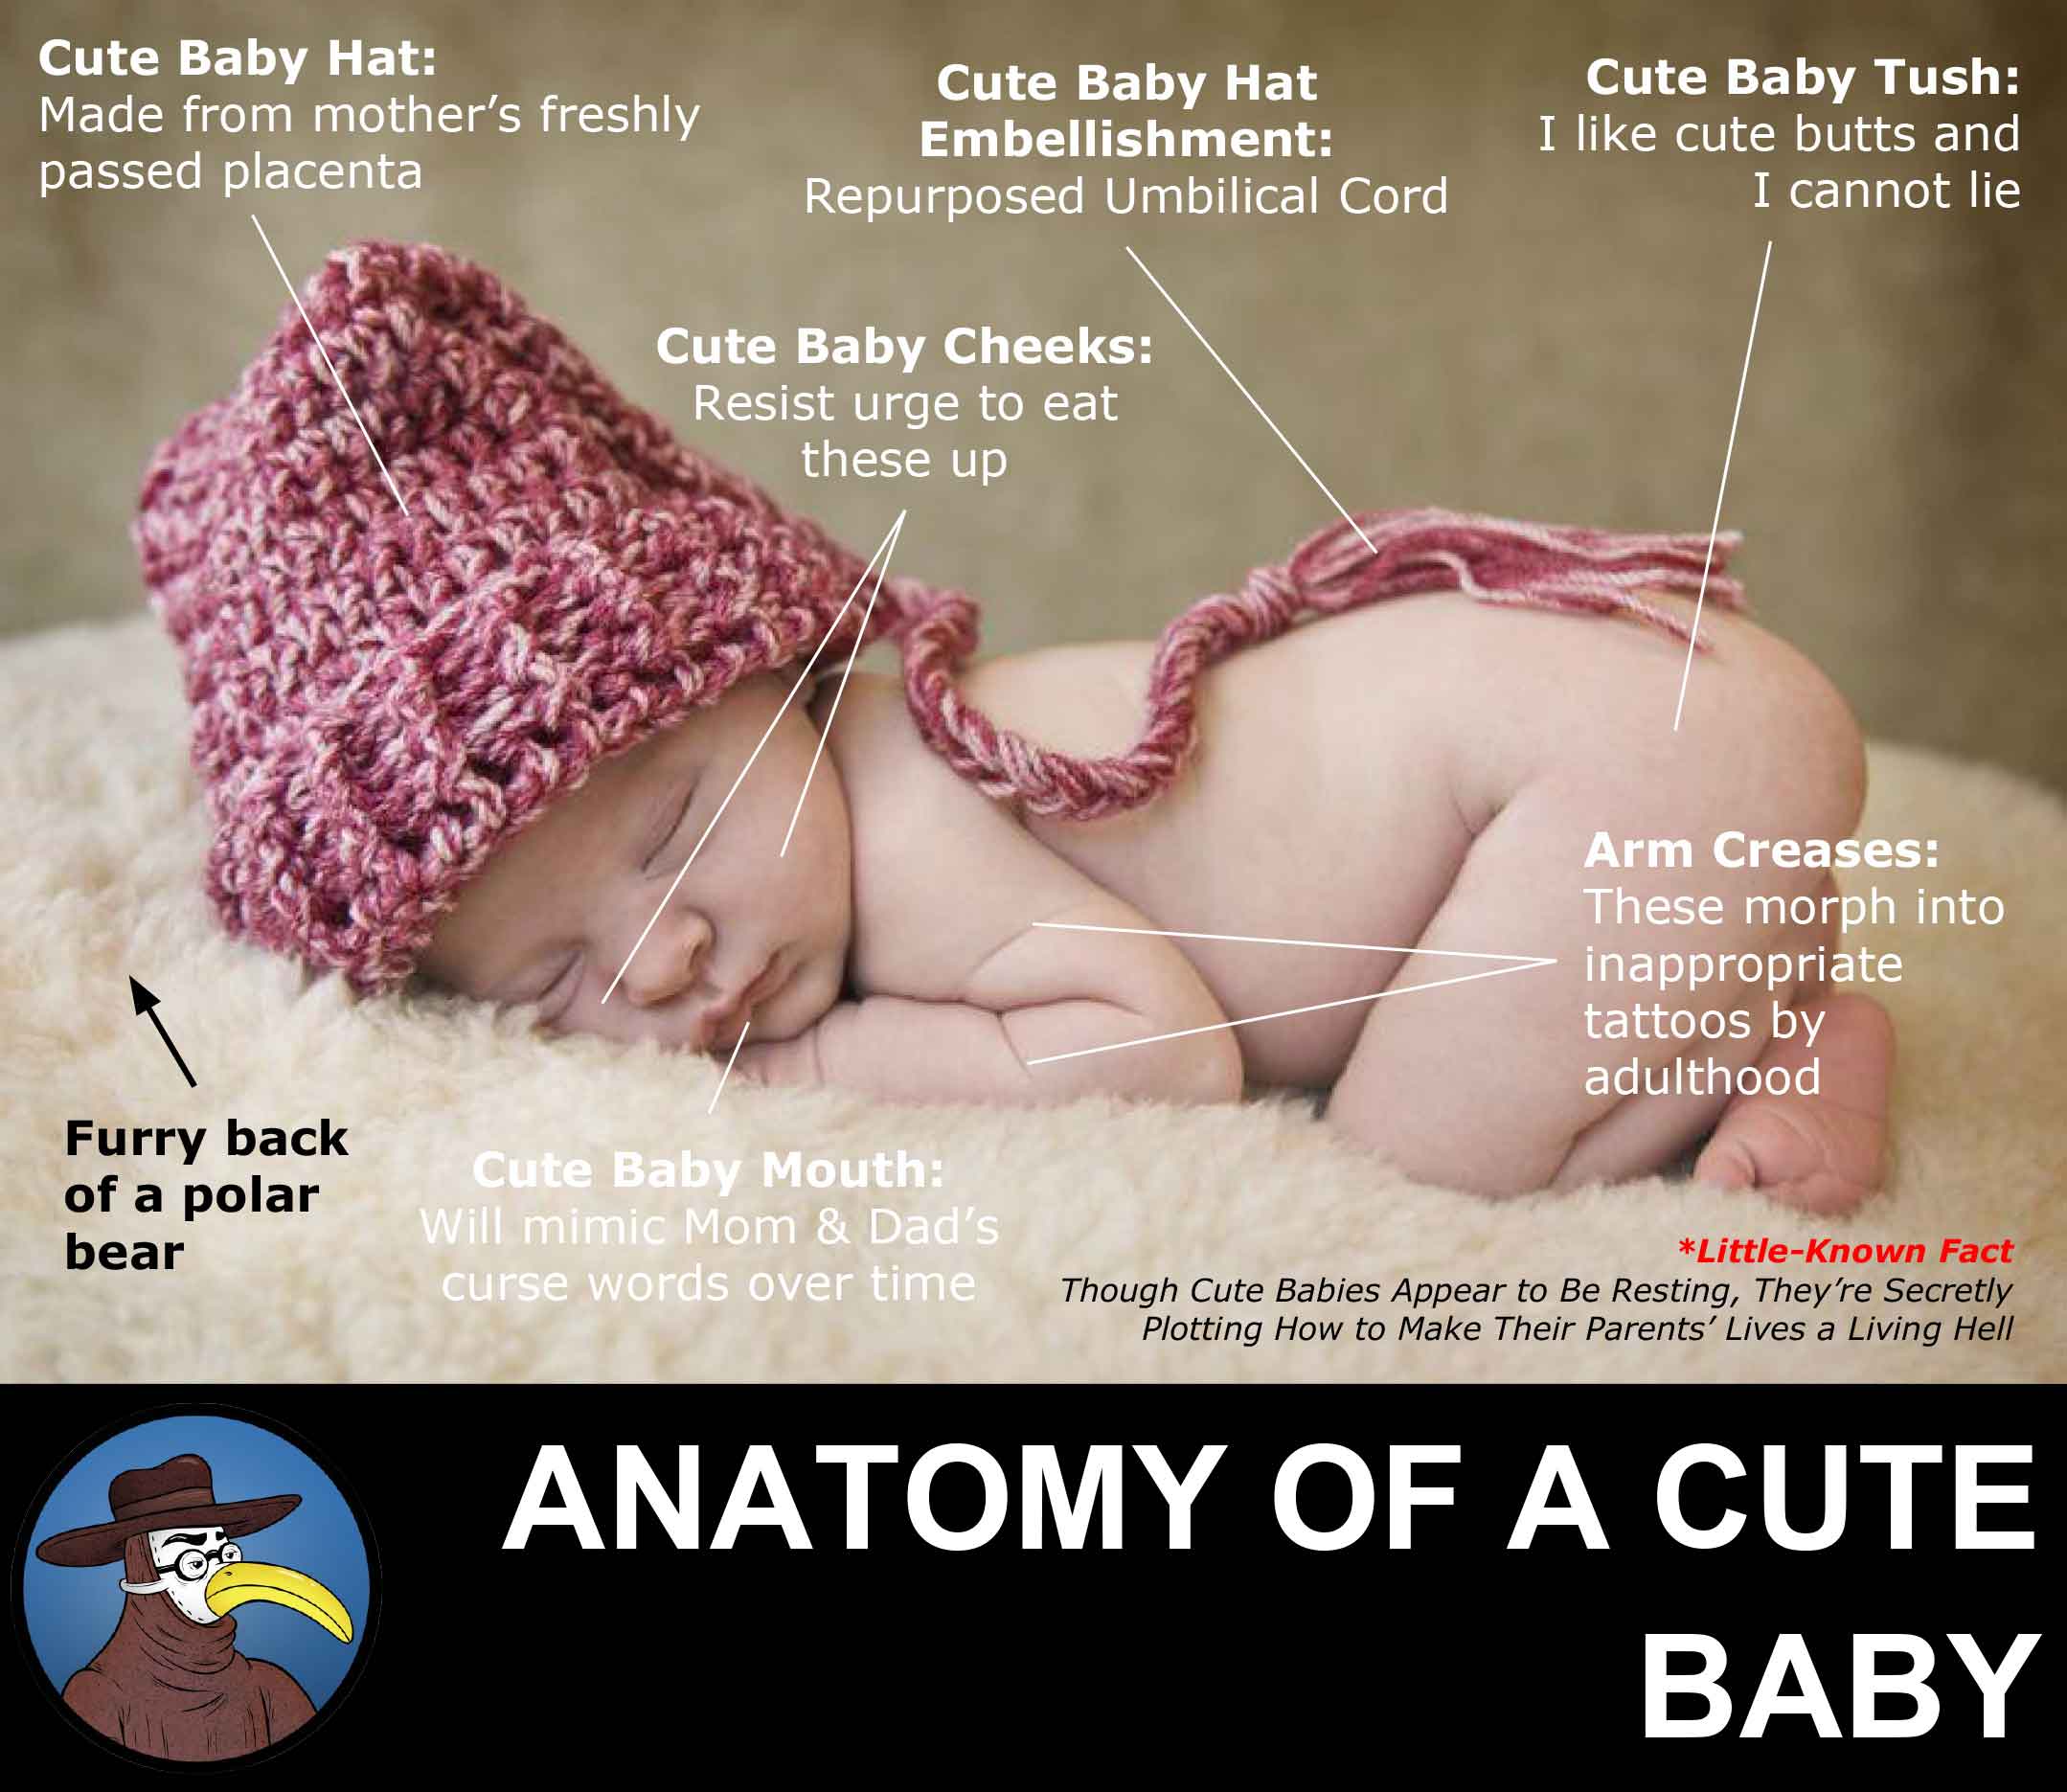 Anatomy of a Cute Baby